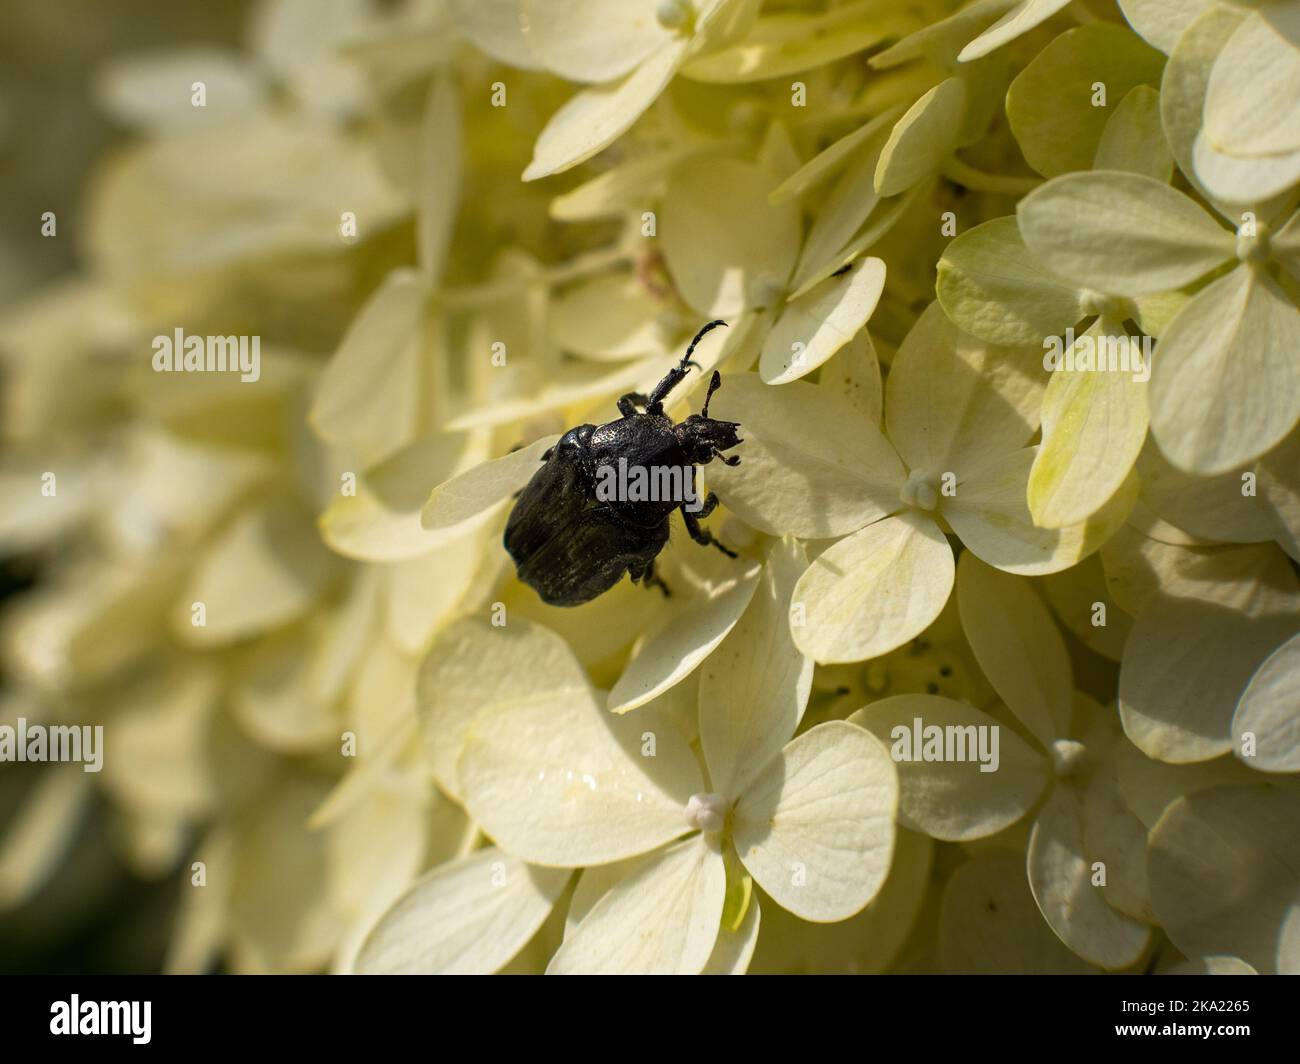 Black rose chafer (Cetoniinae). Macro photography of a scarab bug crawling on the white blossoms. German wildlife in a natural garden environment. Stock Photo